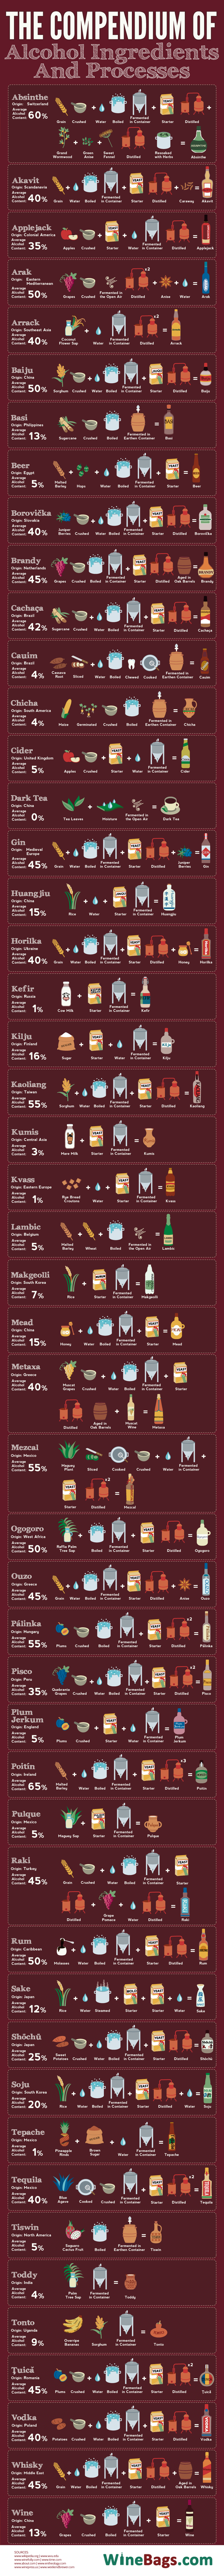 The Compendium of Alcohol Ingredients and Processes - Winebags.com - Infographic